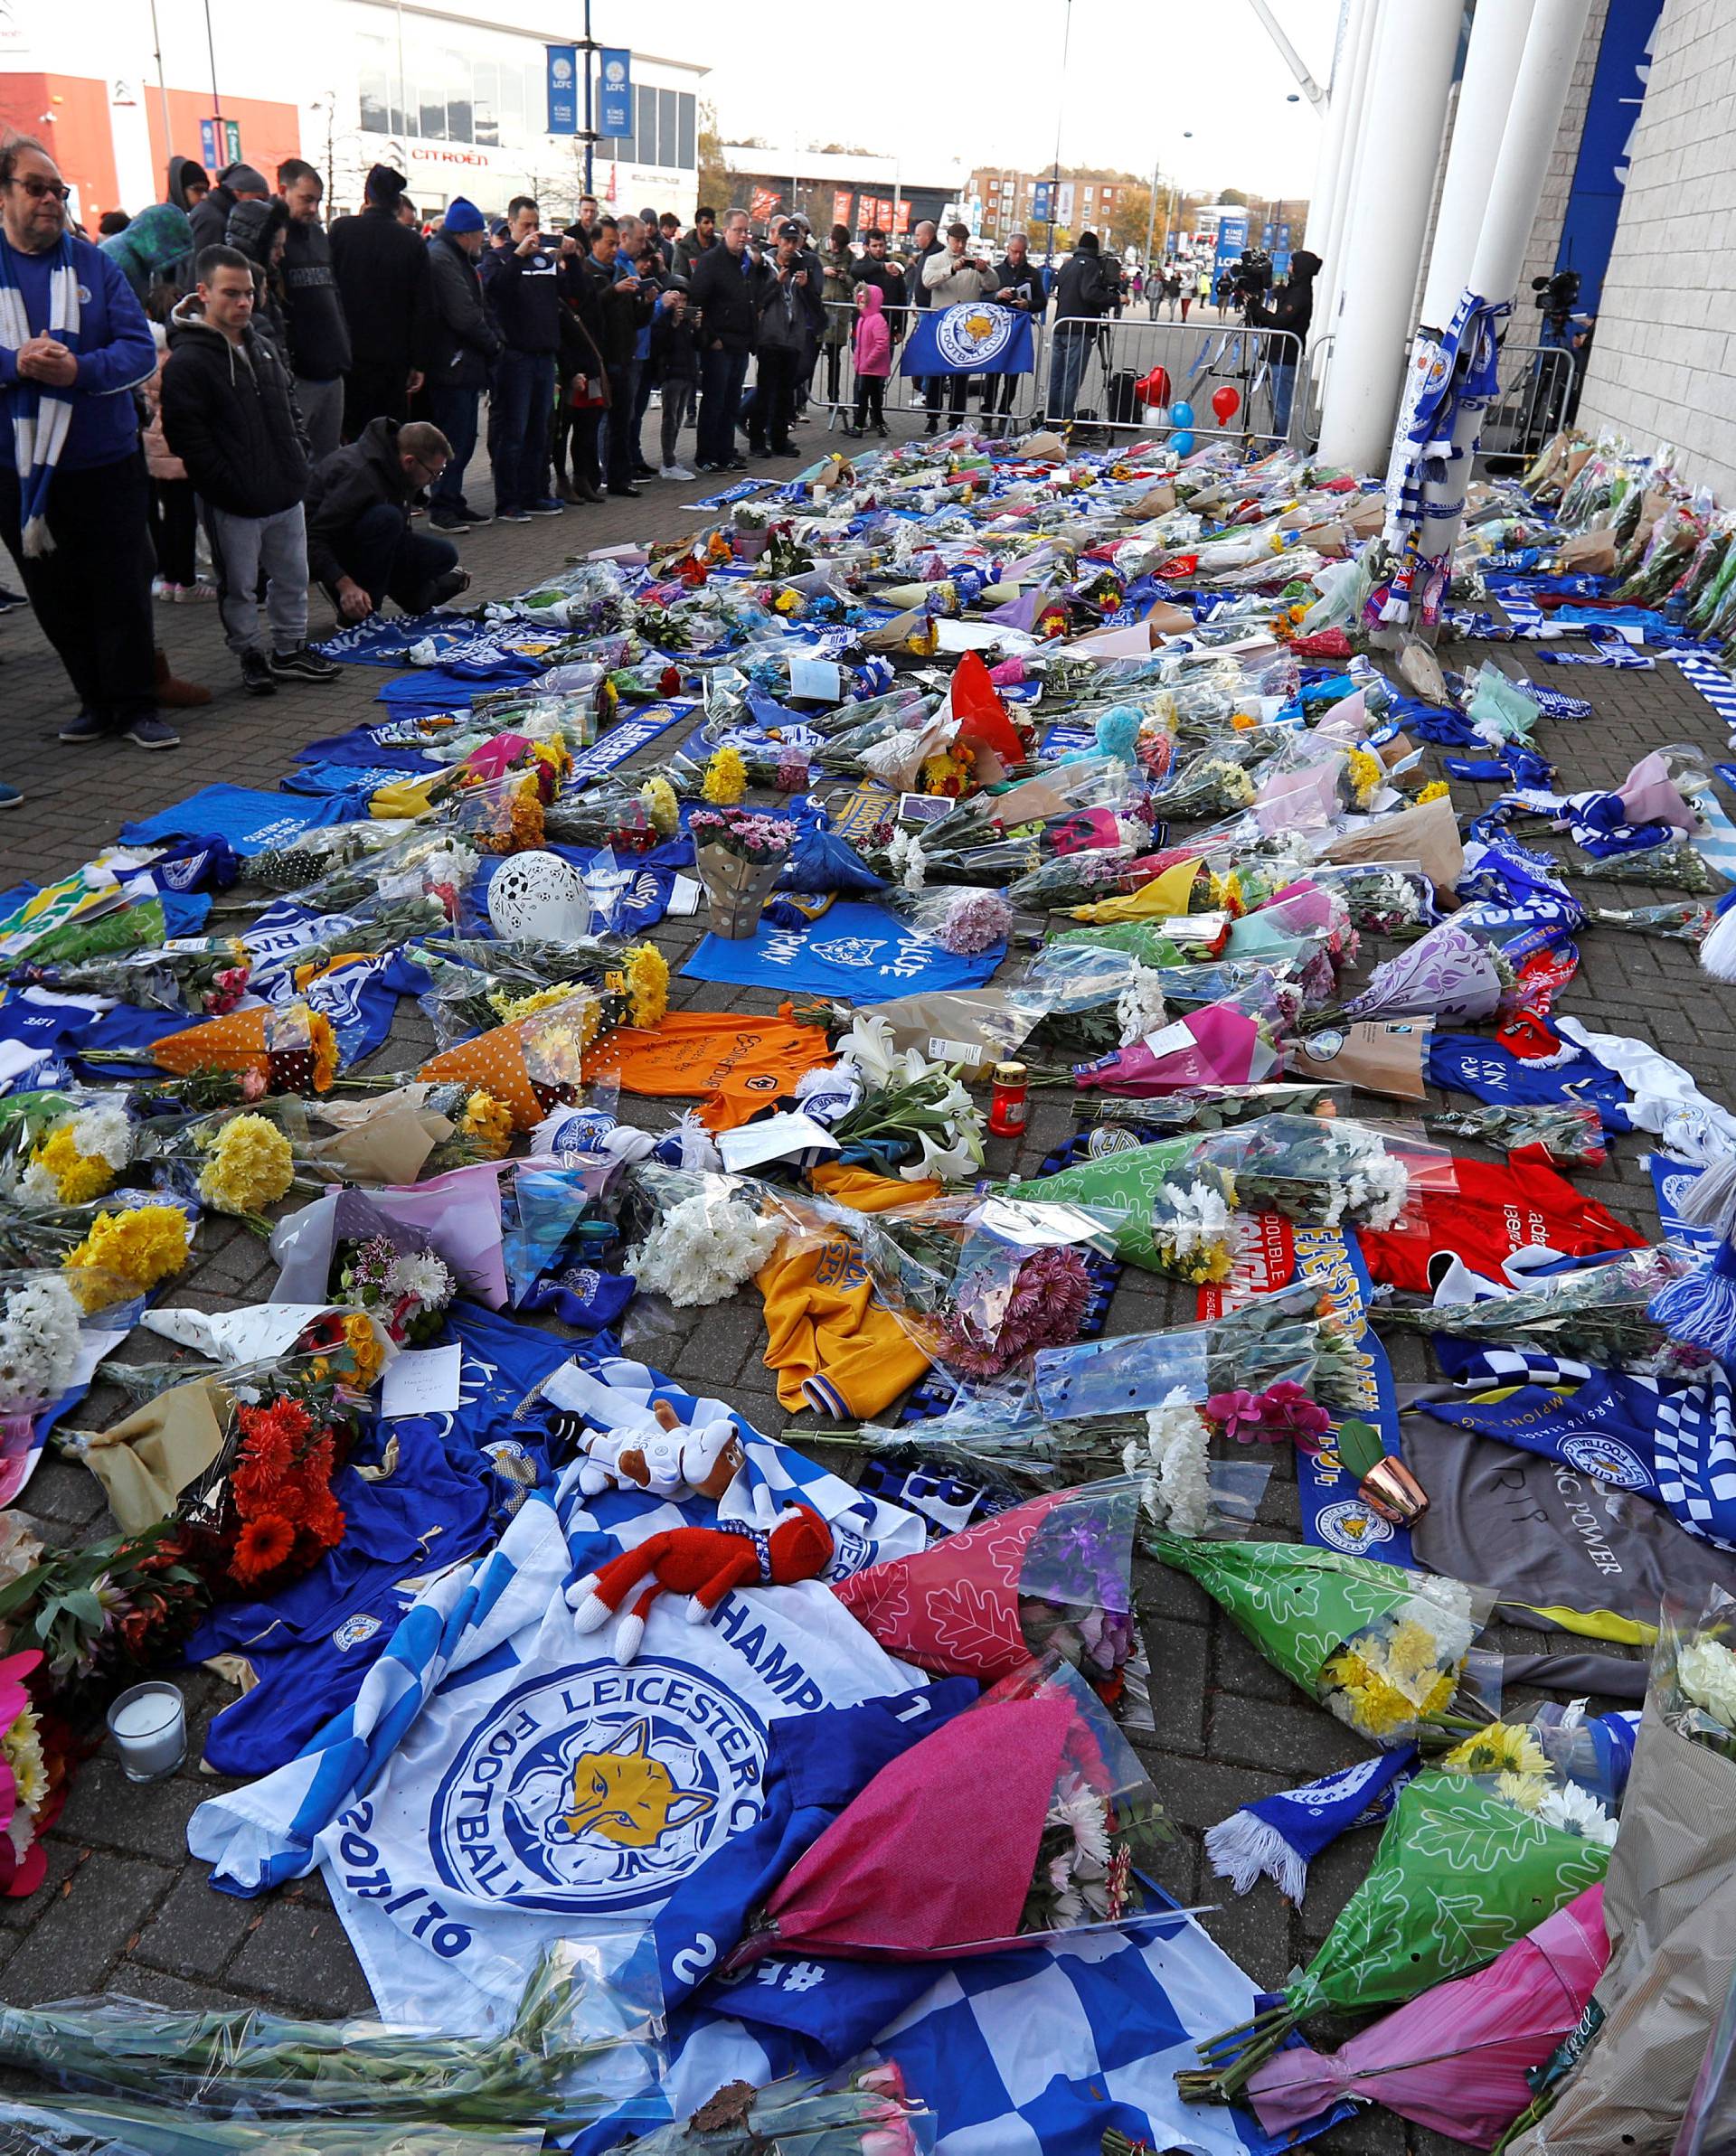 Leicester City football fans pay their respects outside the football stadium, after the helicopter of the club owner Thai businessman Vichai Srivaddhanaprabha crashed when leaving the ground on Saturday evening after the match, in Leicester